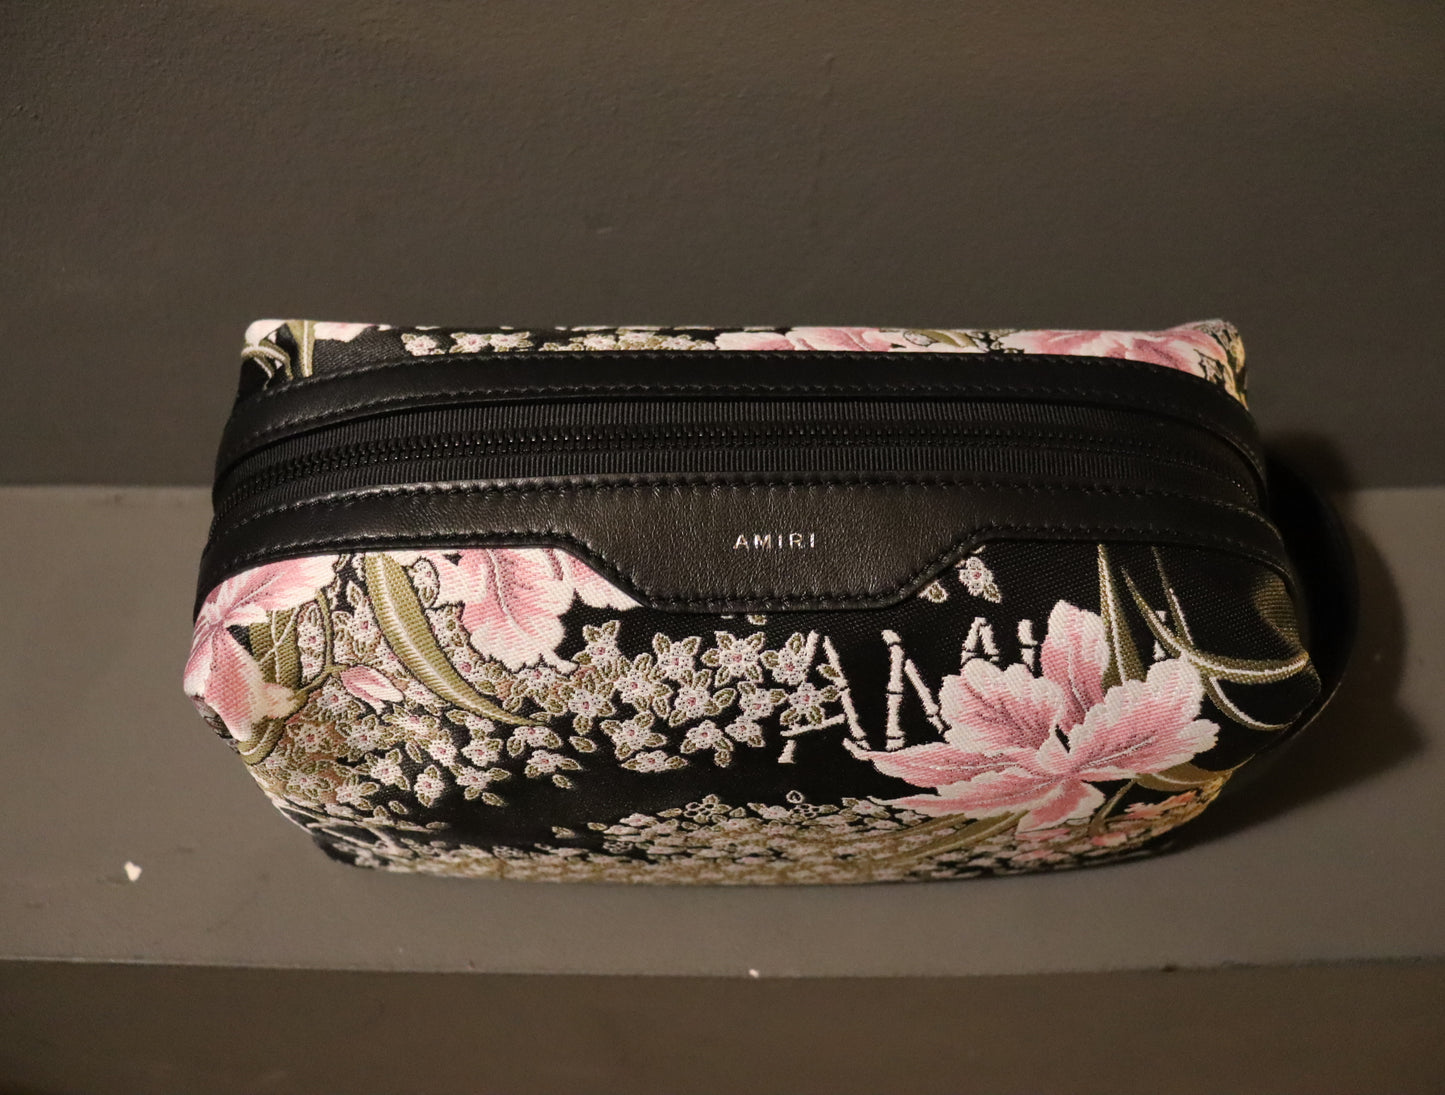 A stylish AMIRI Hibiscus Jacquard Dopp Kit in a multi-colored jacquard fabric, complemented by a twill lining and leather detailing. The AMIRI logo is embroidered on the kit. This kit comes in one size (O/S) and features a vibrant and eye-catching design.